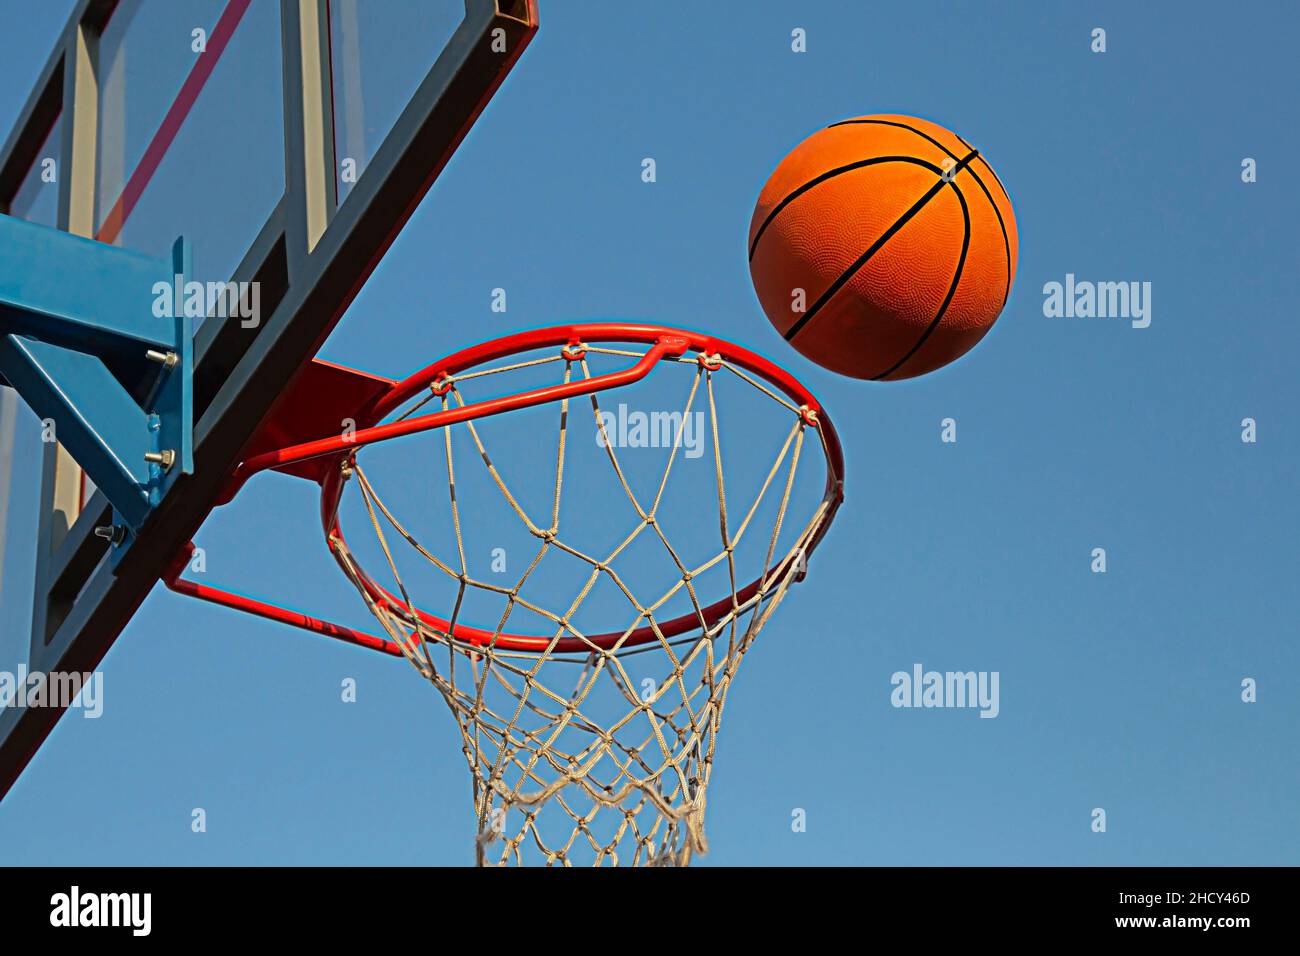 A basketball in a net on a blue sky background. The ball hit the ring. Sports, team game. Conceptual: victory, success, hitting the target, sport. Stock Photo